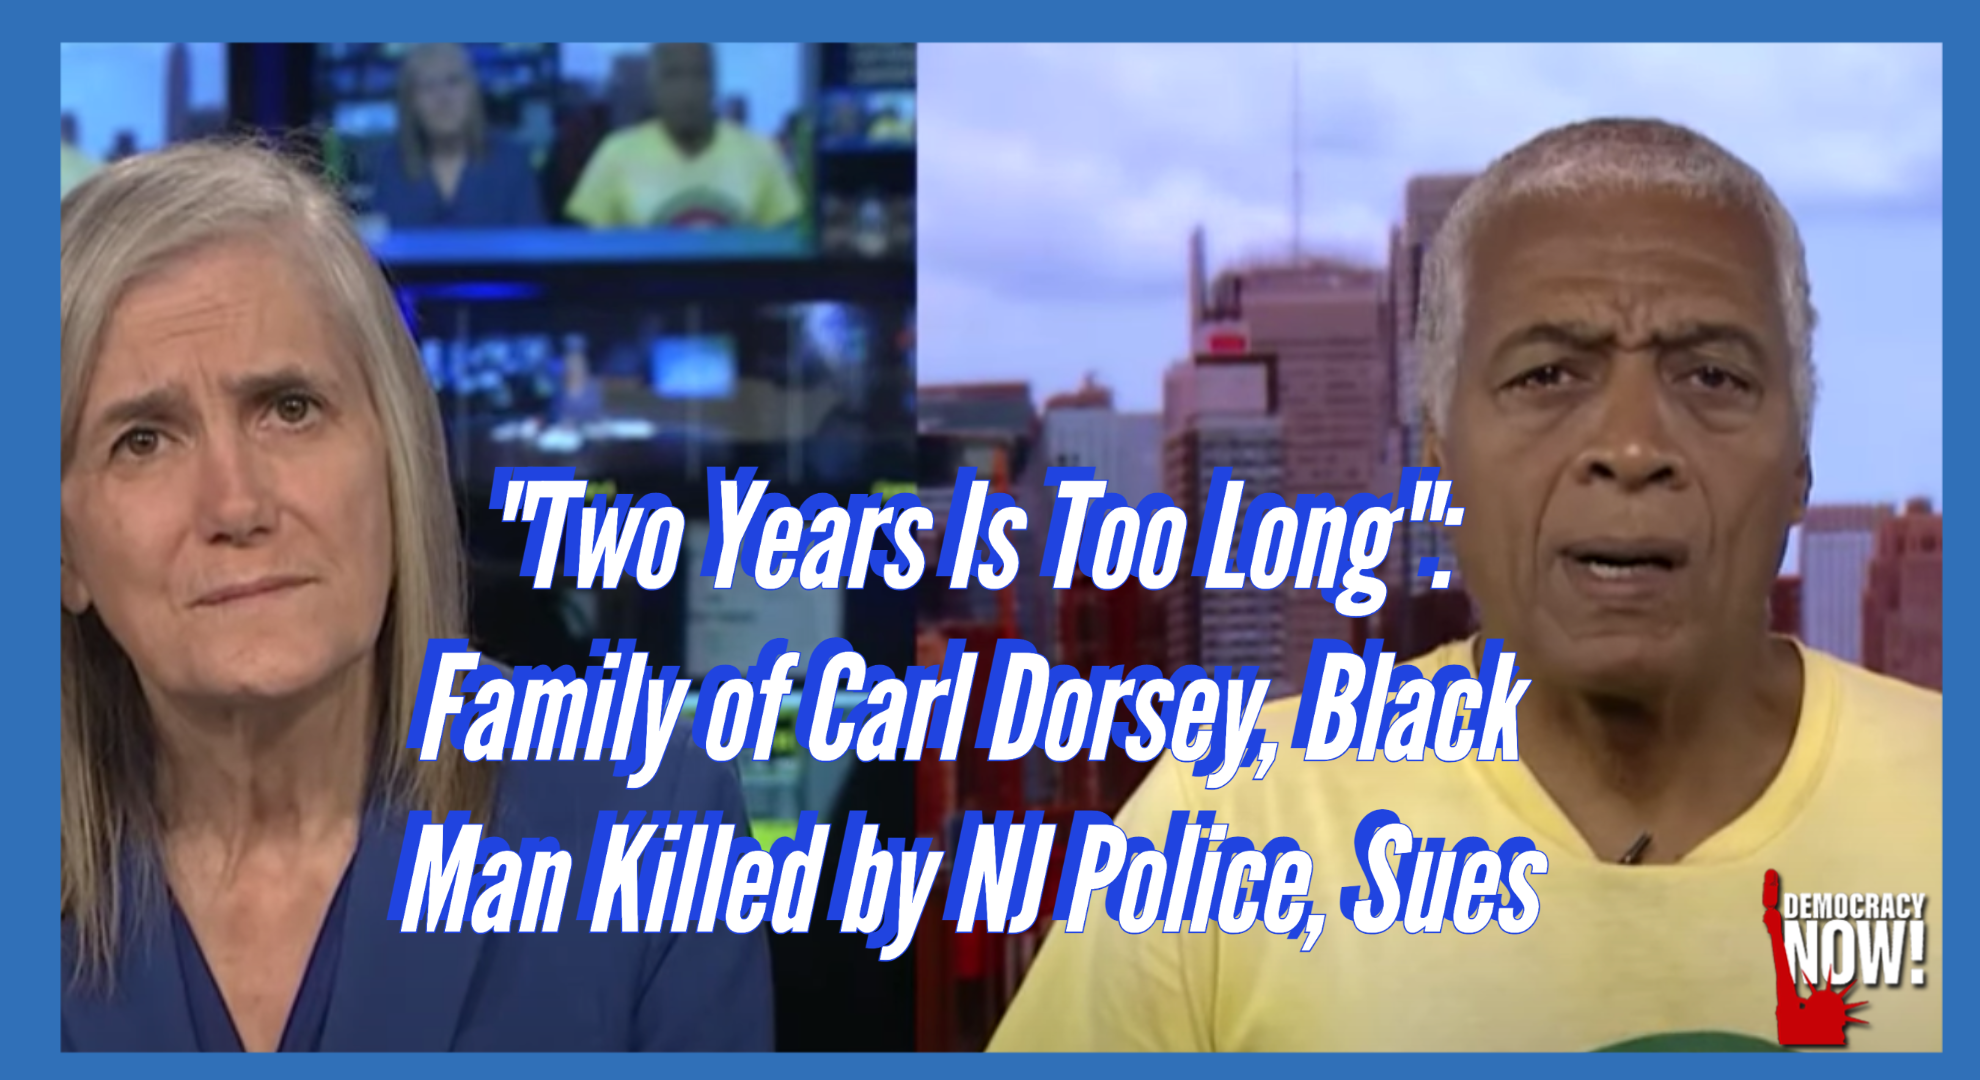 "Two Years Is Too Long": Family of Carl Dorsey, Black Man Killed by NJ Police, Sues